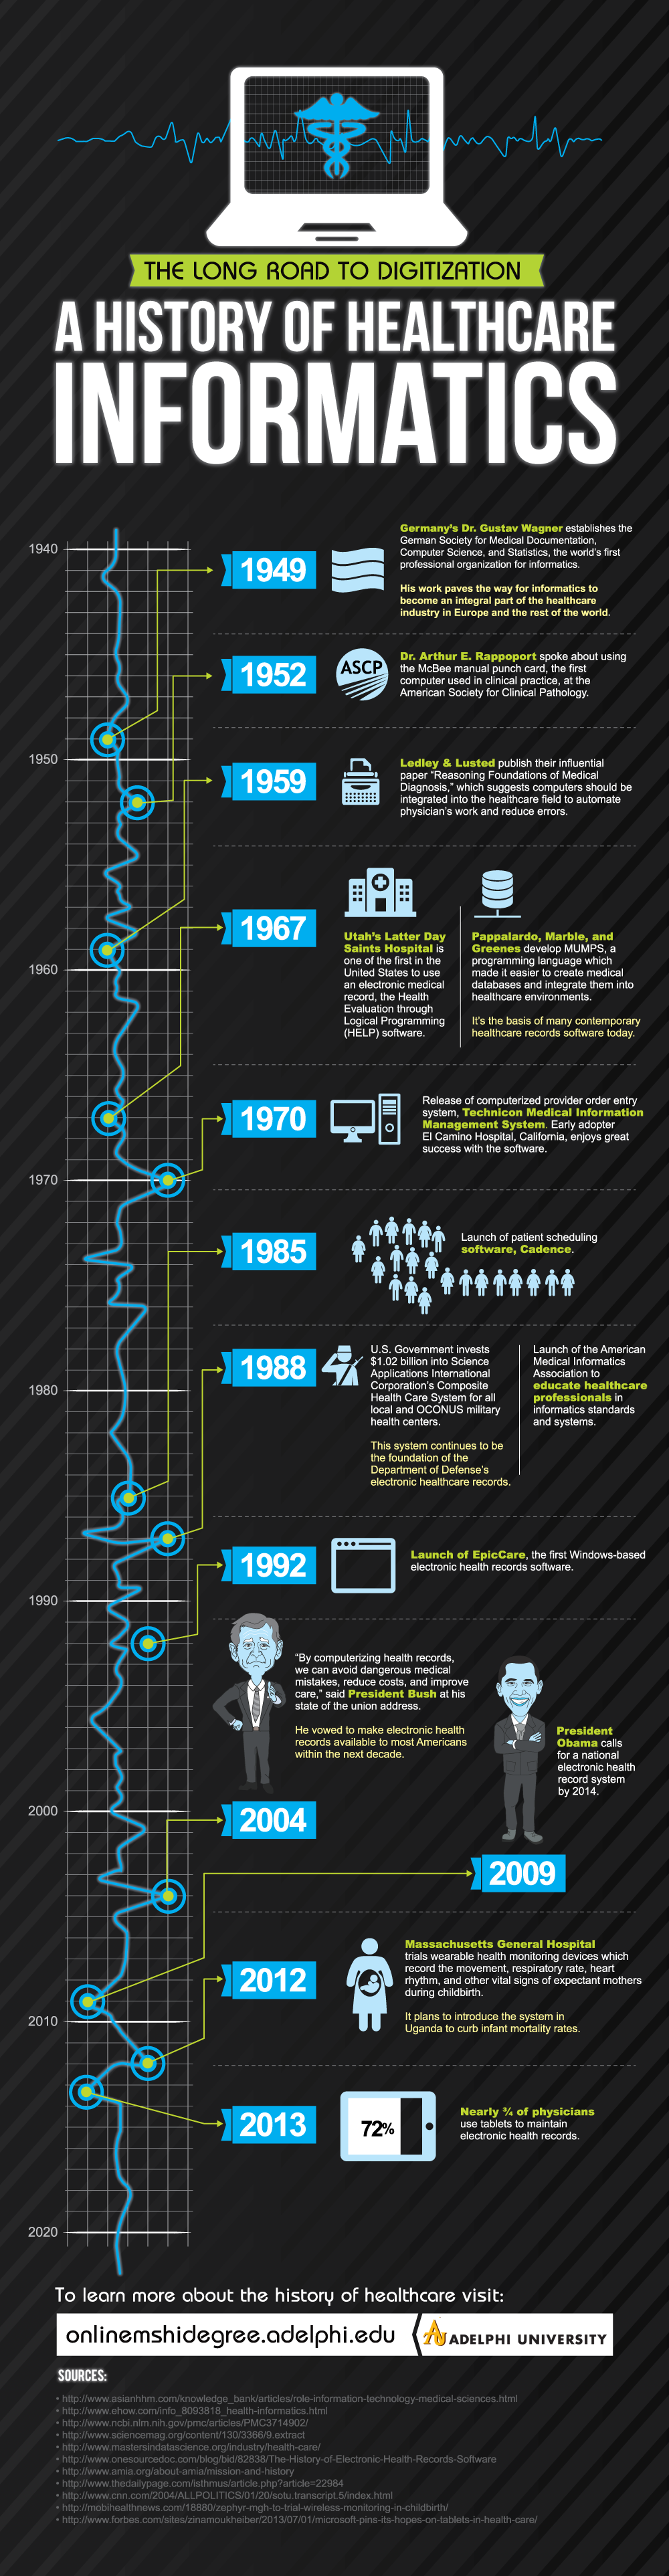  The Long Road to Digitization: A History of Healthcare Informatics [INFOGRAPHIC]